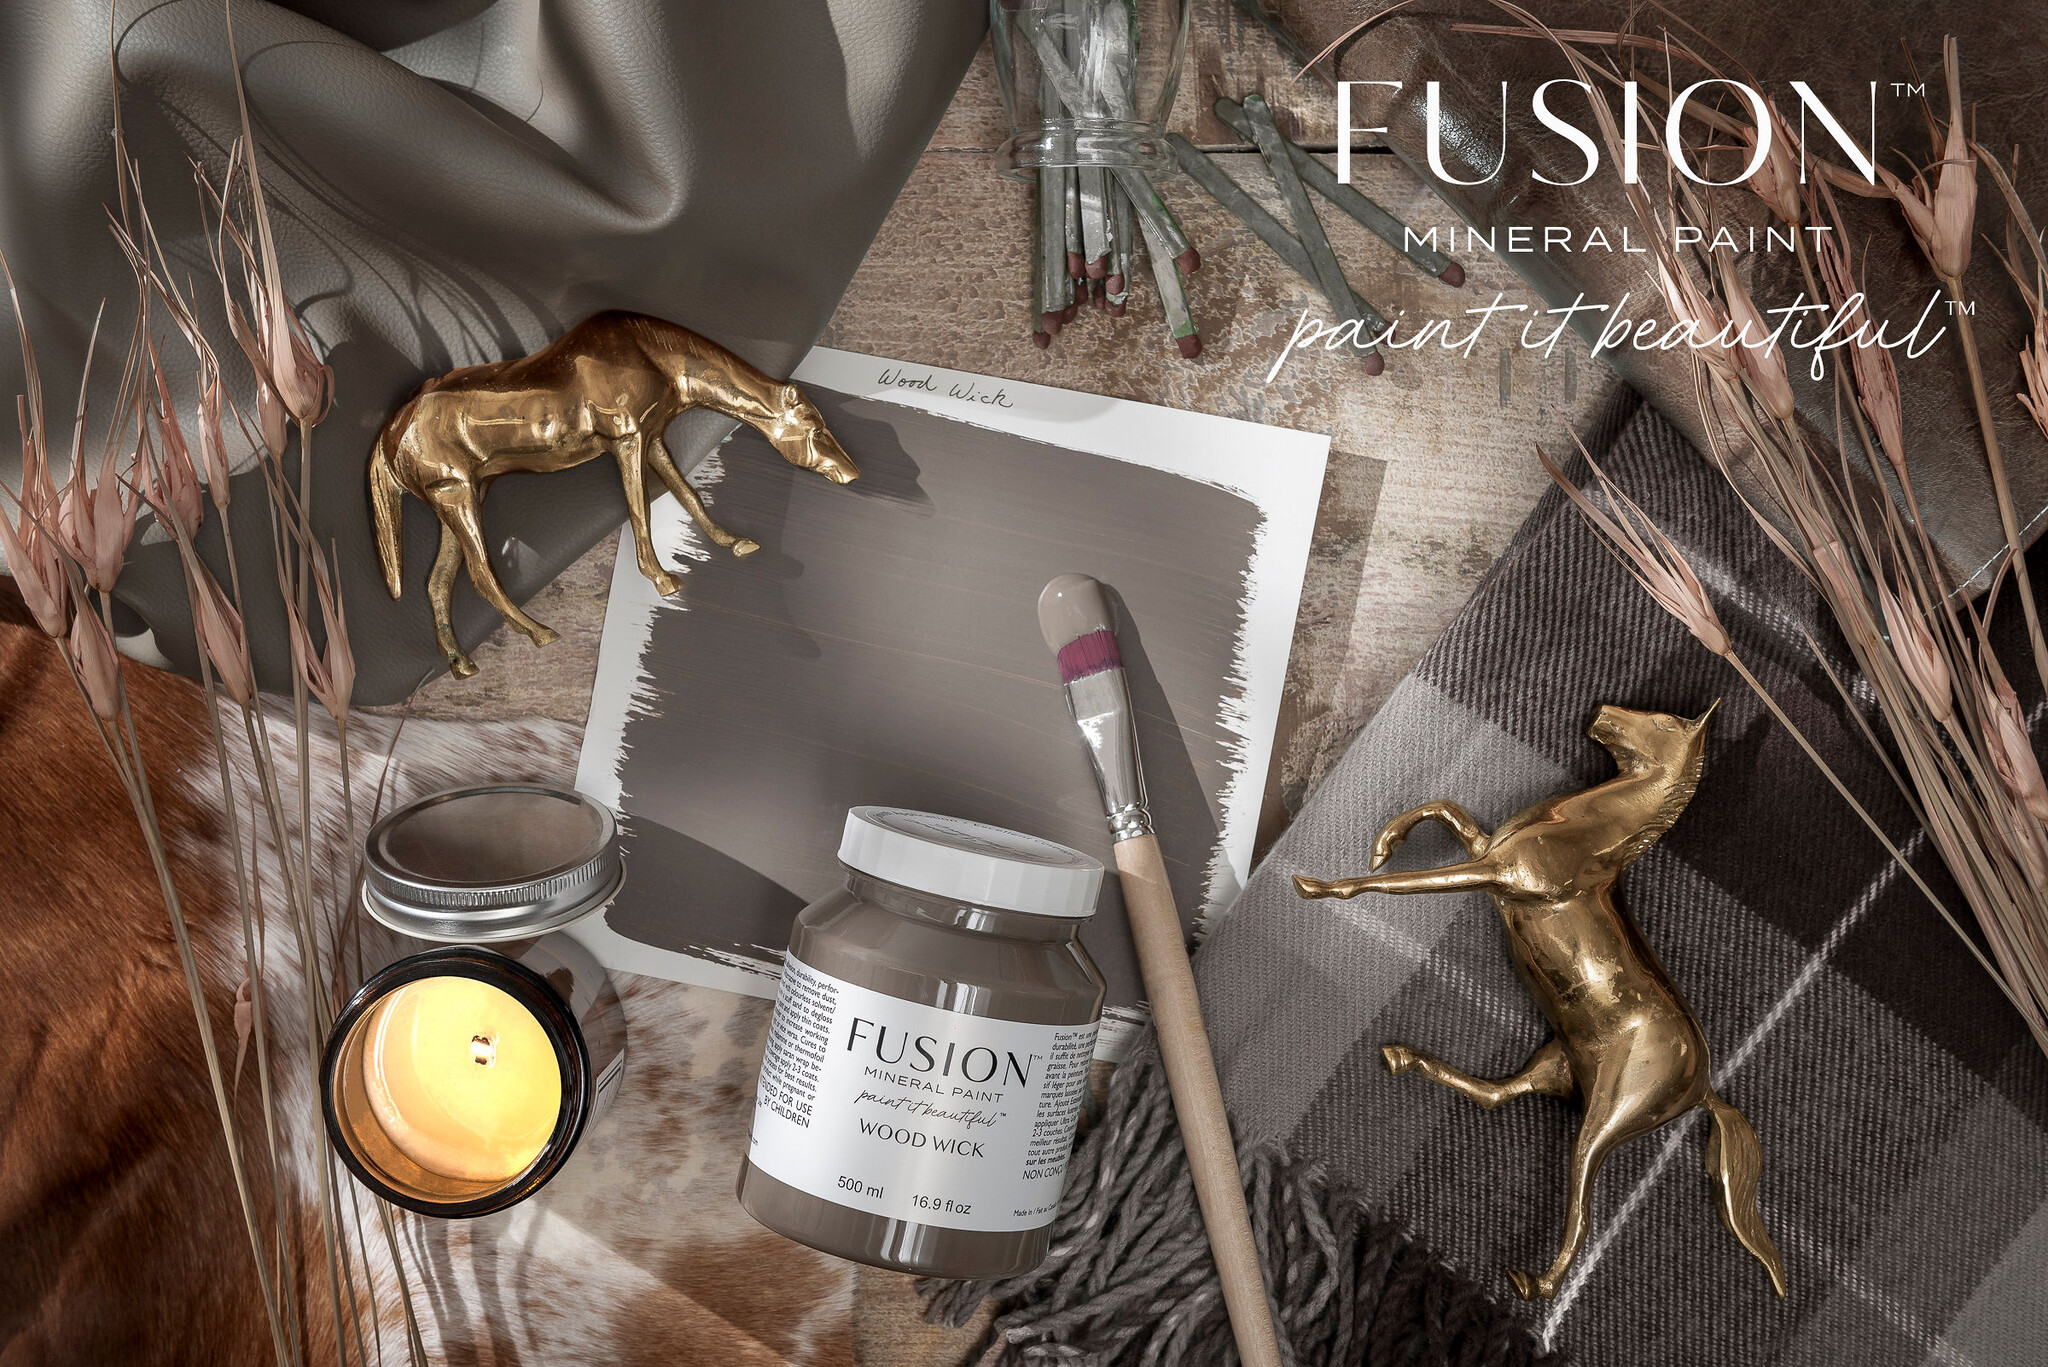 Fusion Mineral Paint Fusion - Wood Wick - 500ml